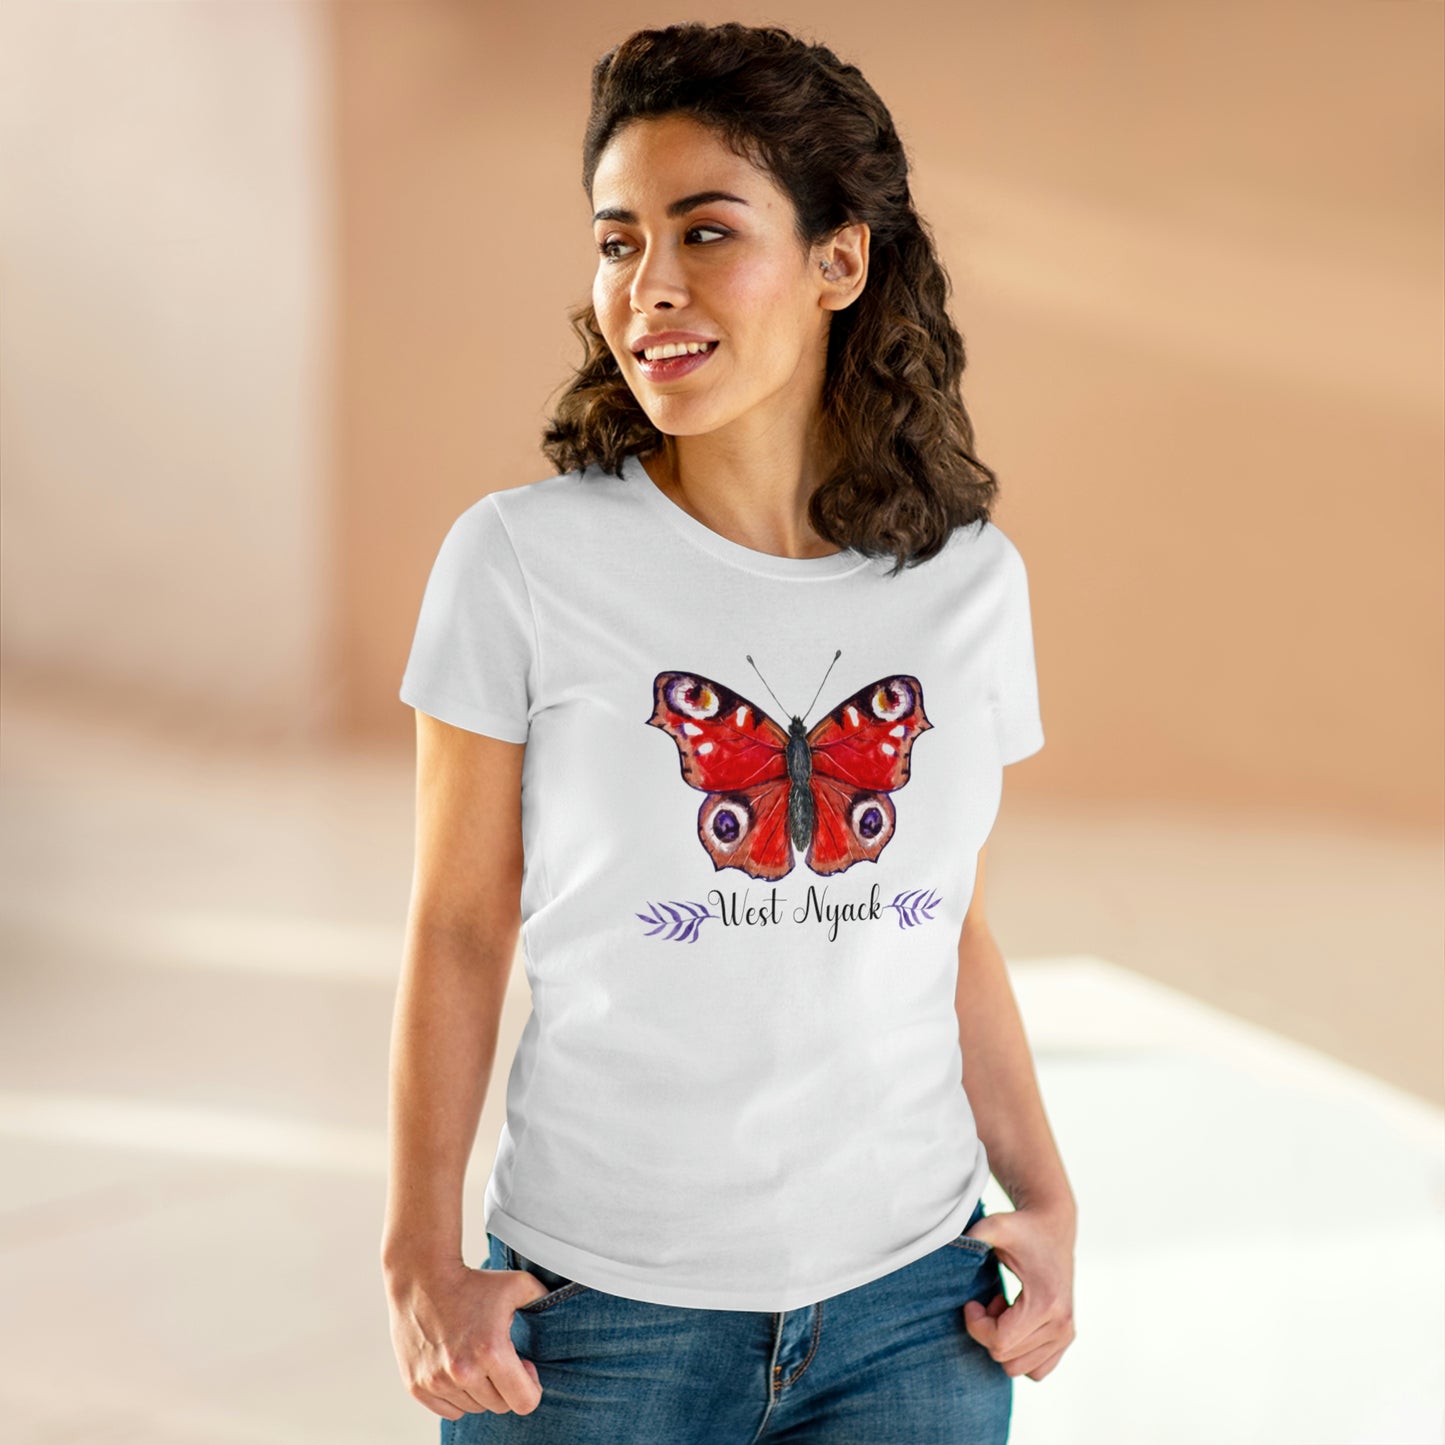 Butterfly West Nyack Tee